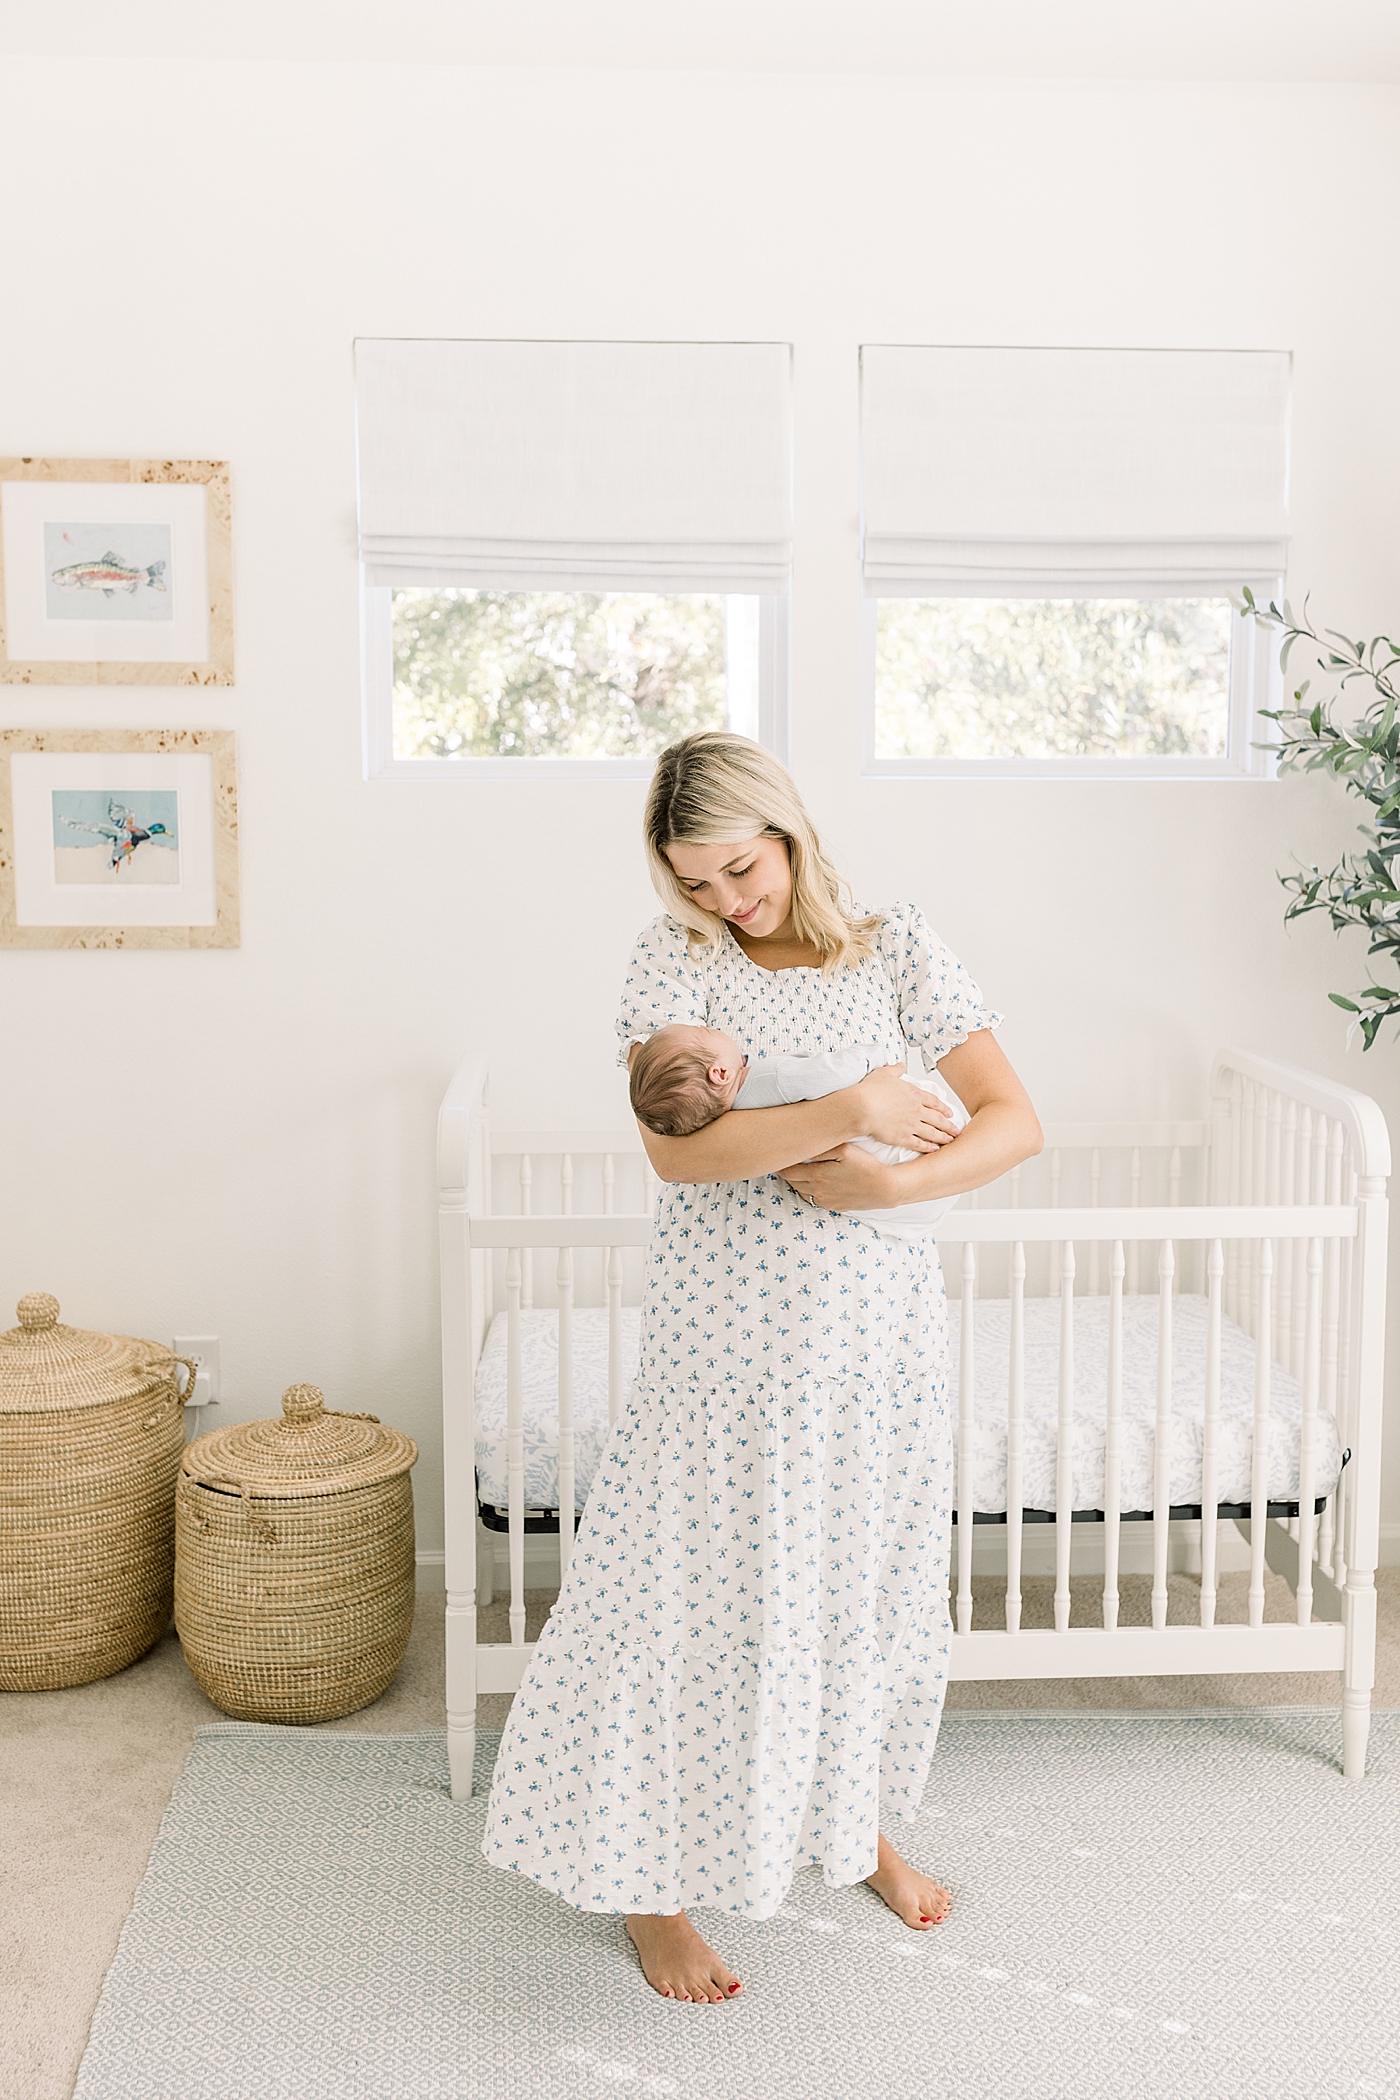 during baby boy bewborn session| Image by Caitlyn Motycka Photography